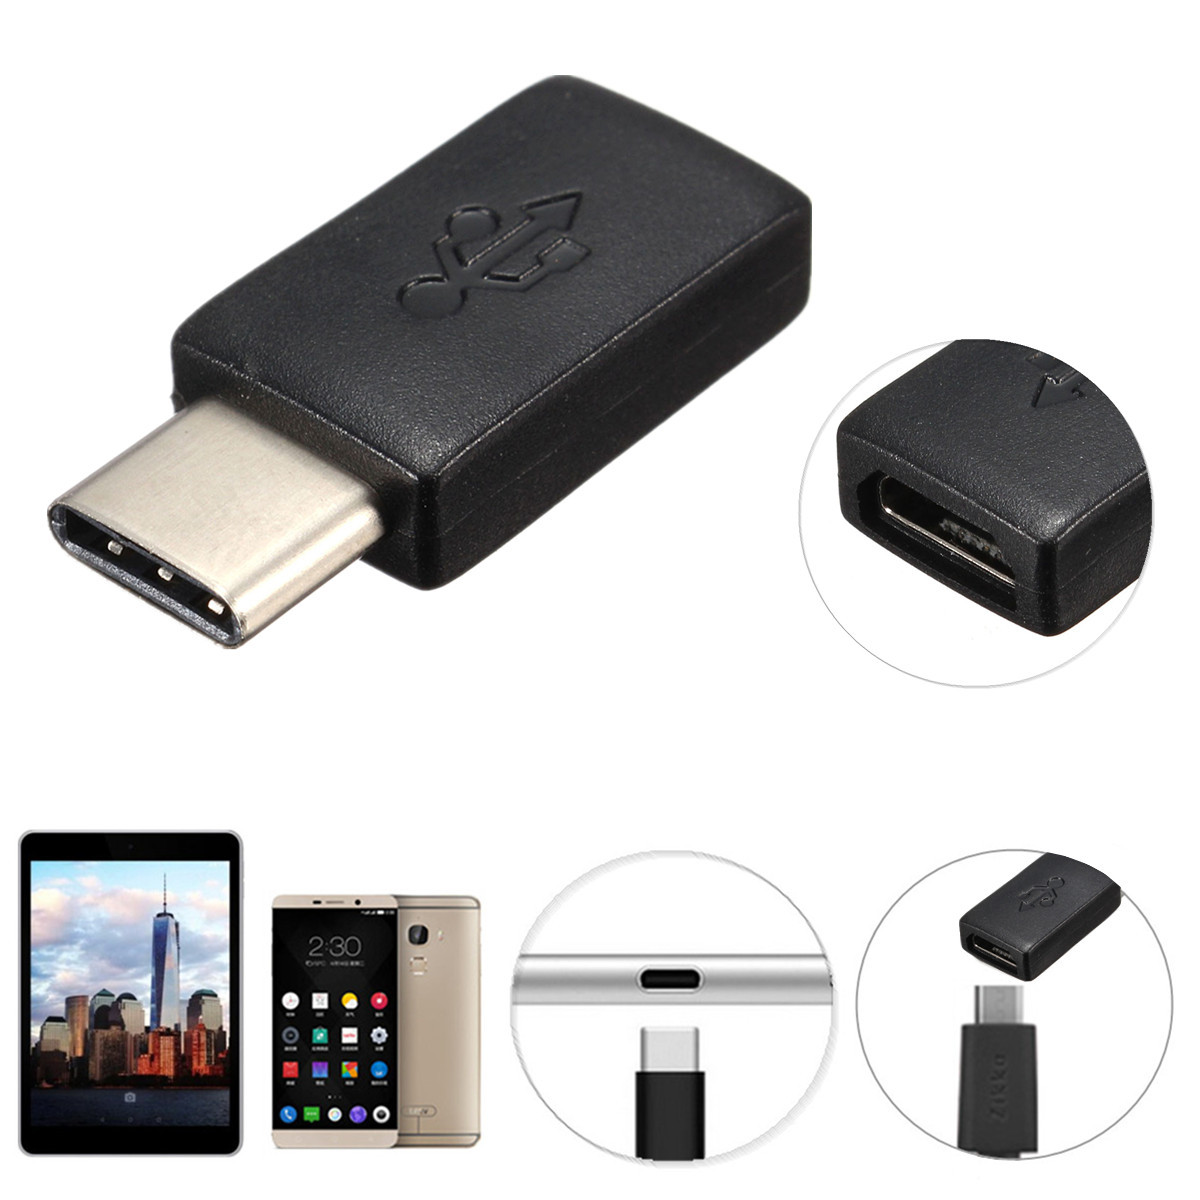 USB-31-Type-C-Male-to-Micro-USB-Female-Transfer-Adapter-1007237-1